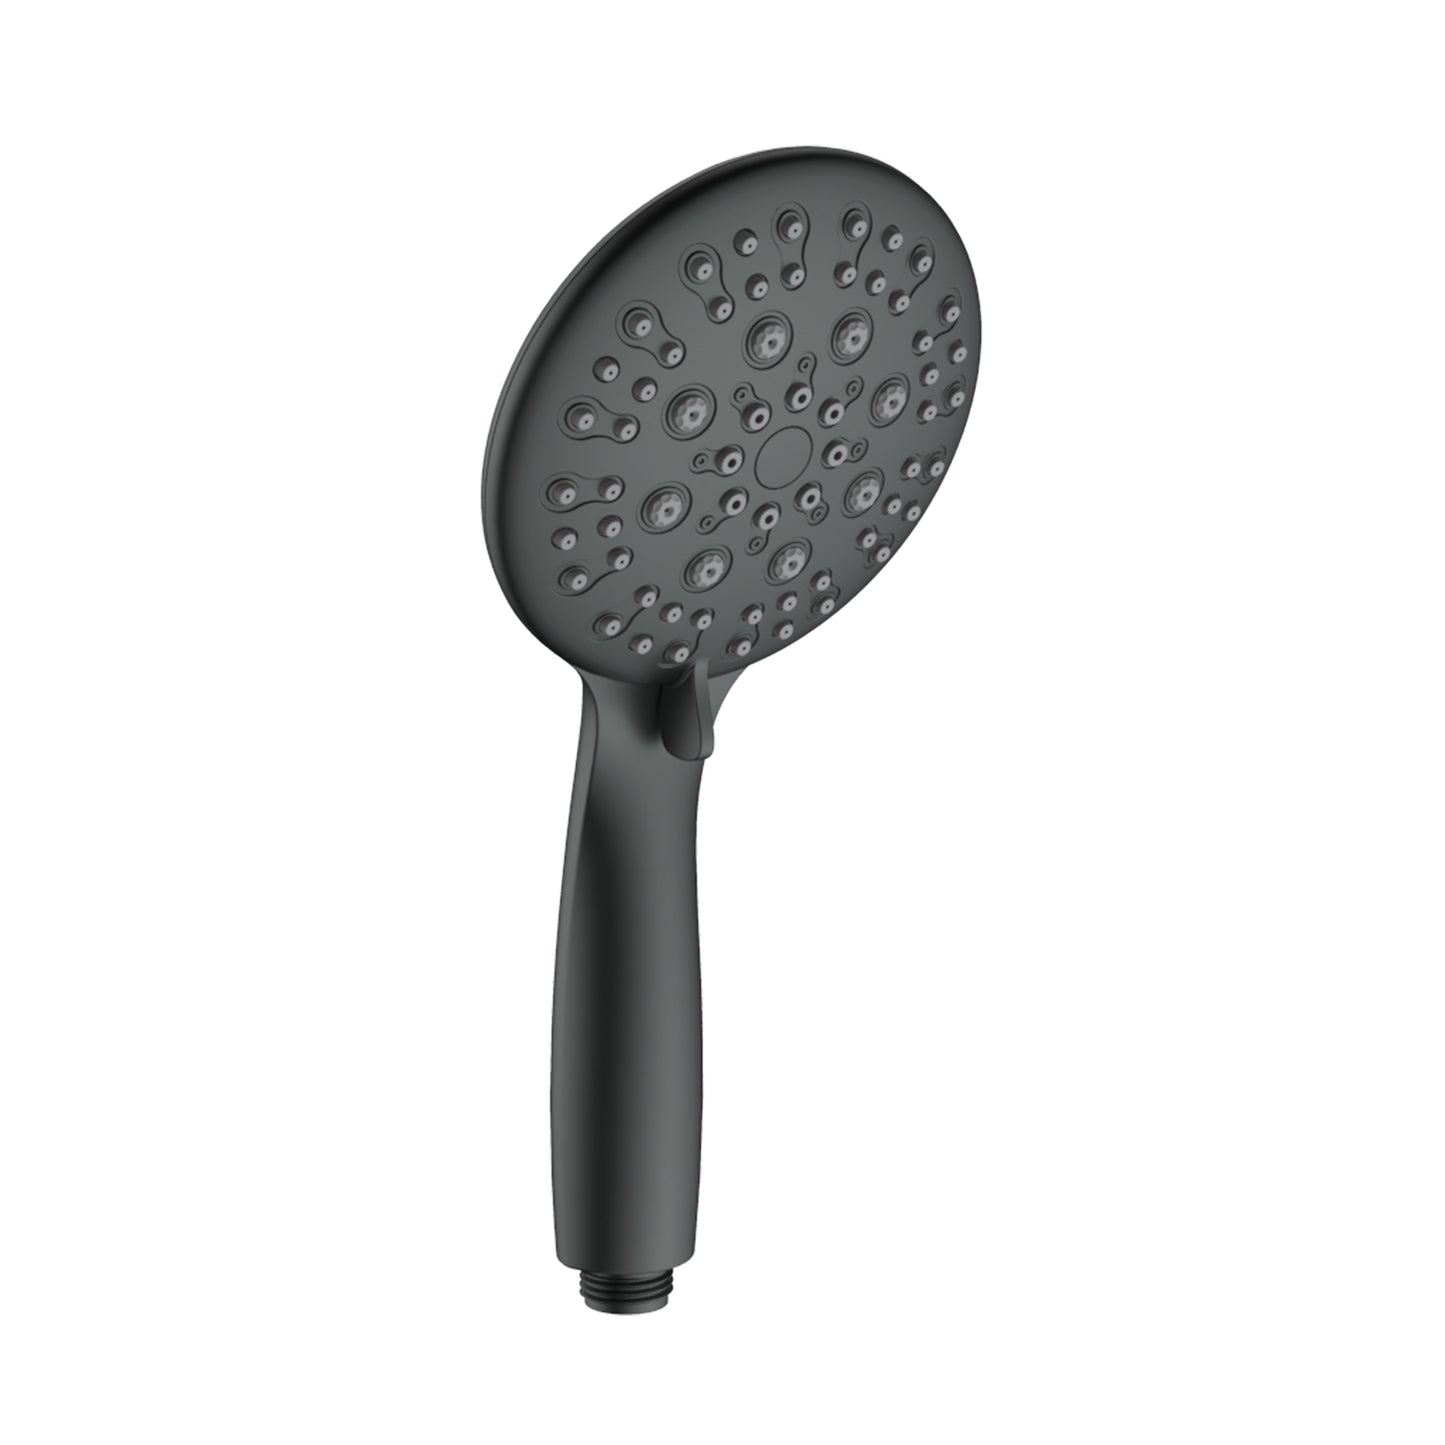 Large Amount of water Multi Function Shower Head - Shower System with 4." Rain Showerhead, 6-Function Hand Shower, Simple Style,With Storage Hook, Matte Black